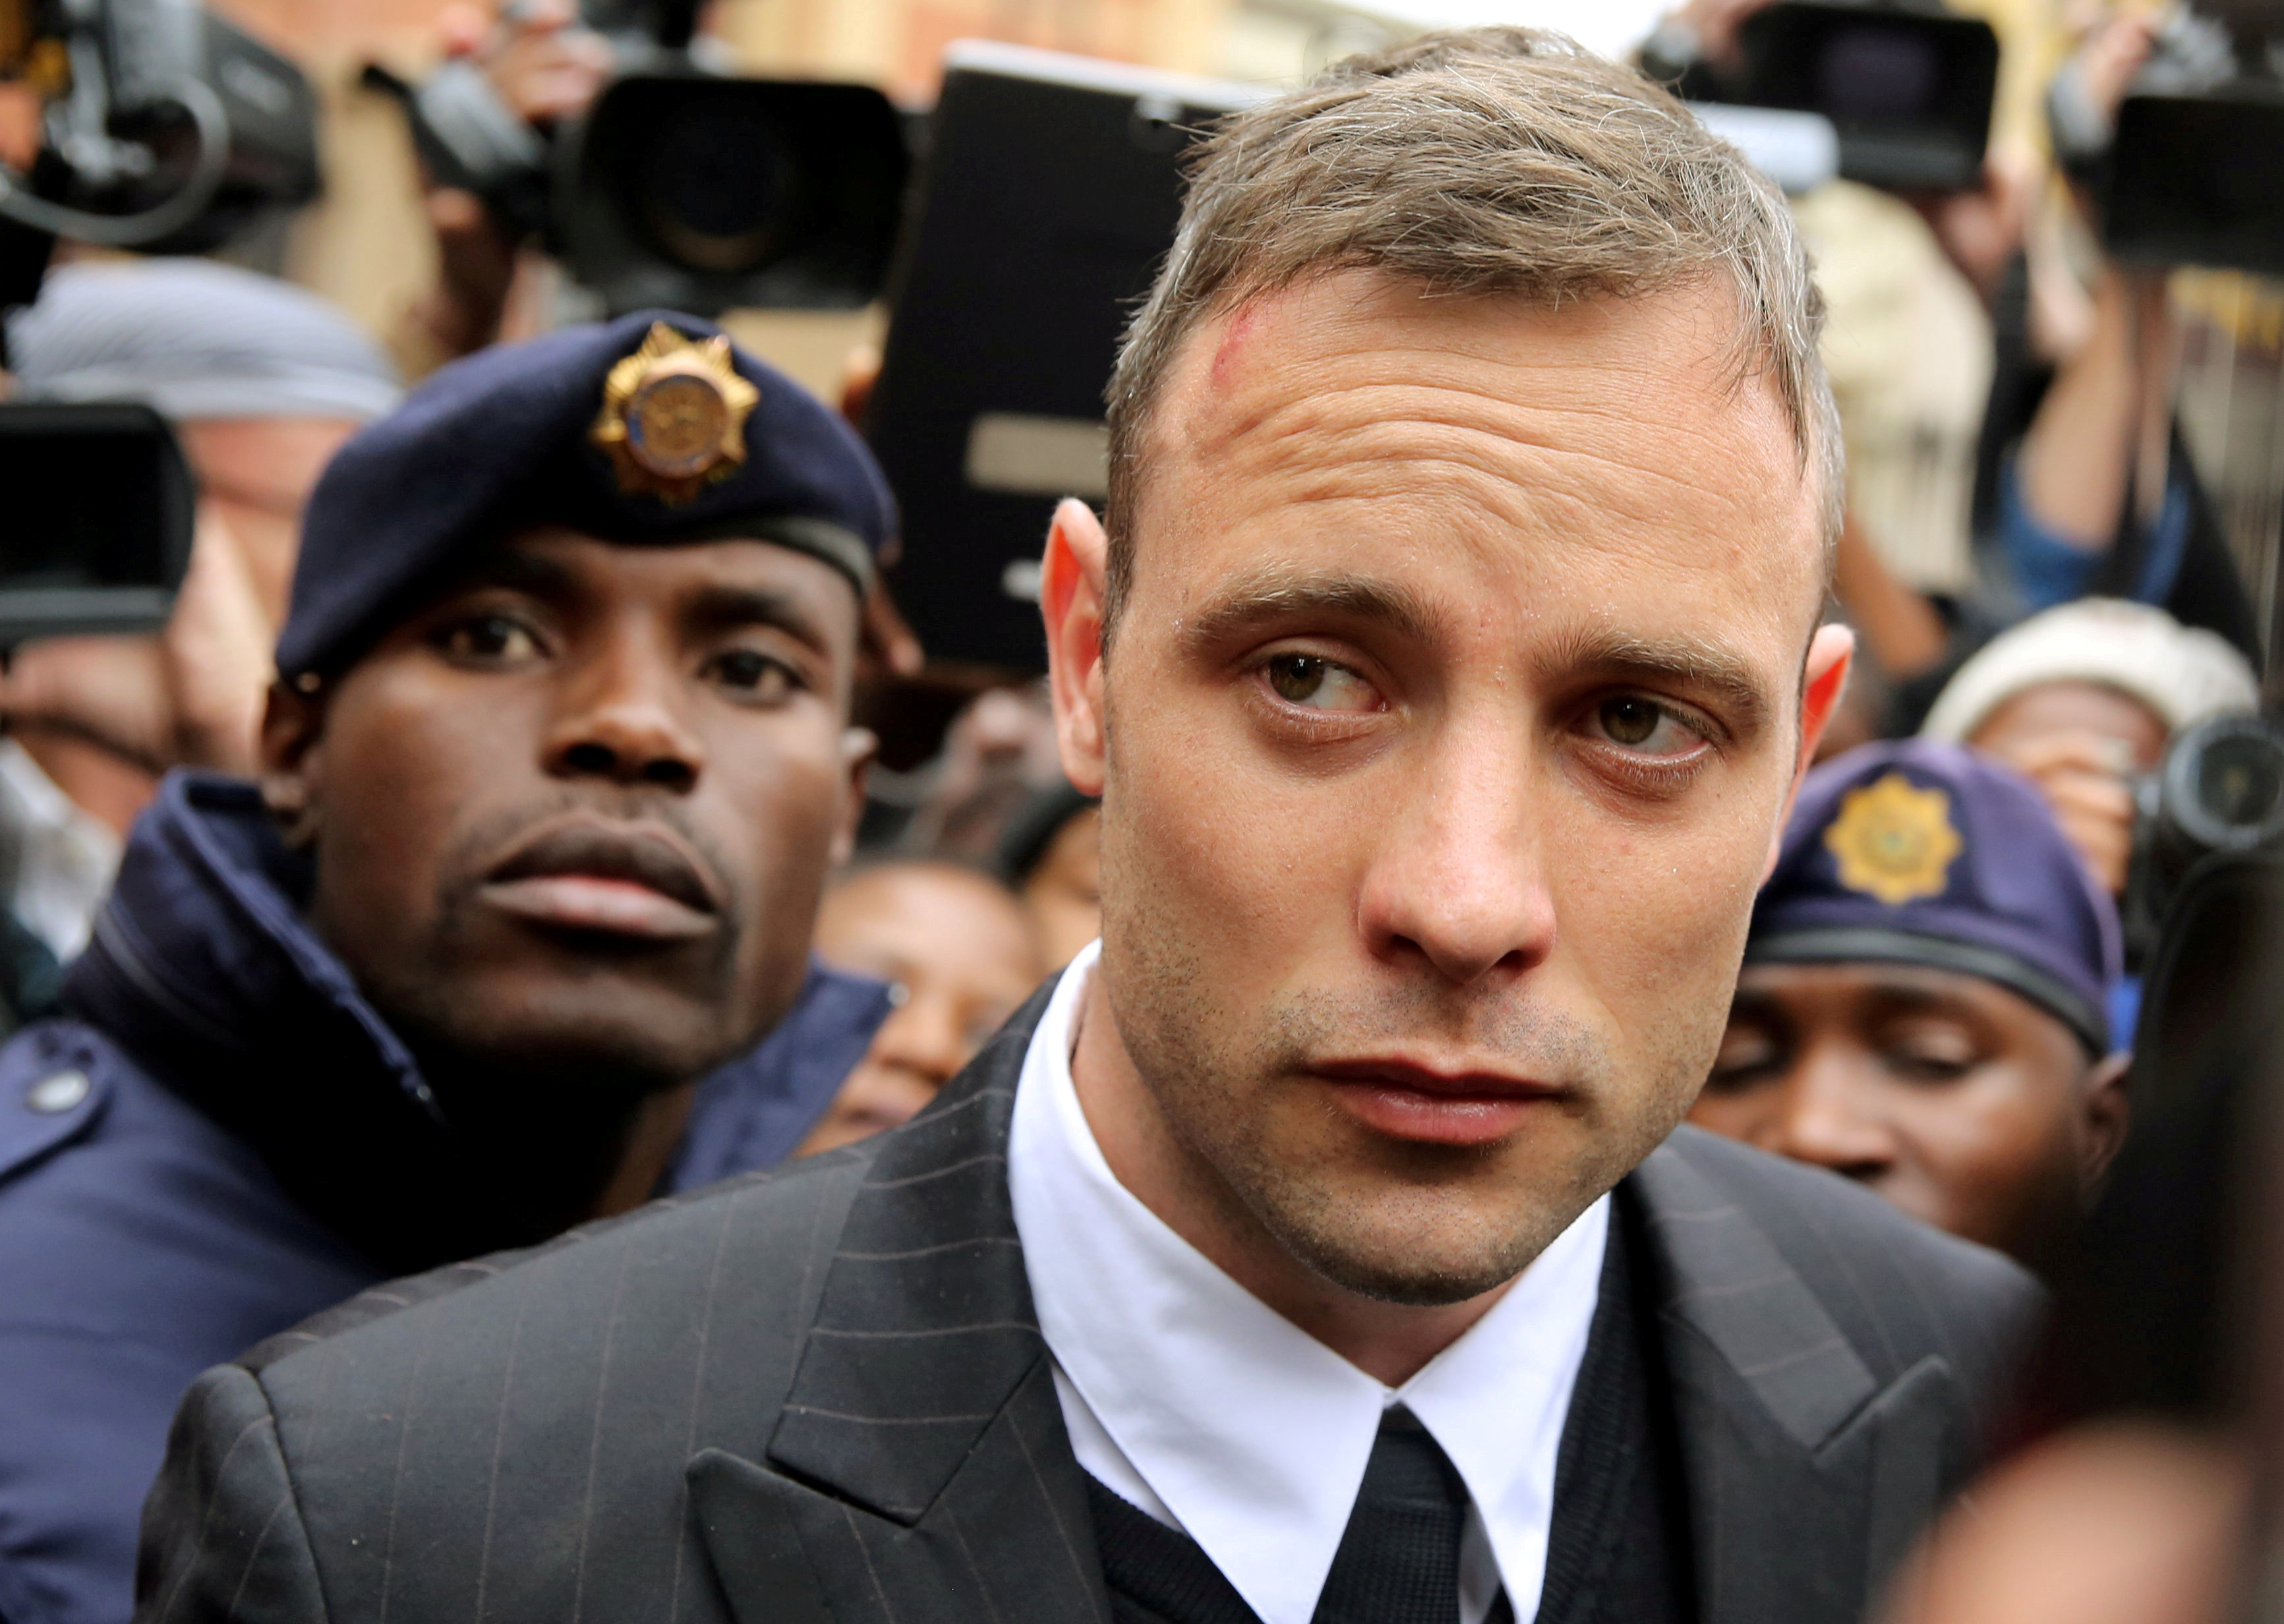 Olympic and Paralympic track star Oscar Pistorius leaves court after appearing for the 2013 killing of his girlfriend Reeva Steenkamp